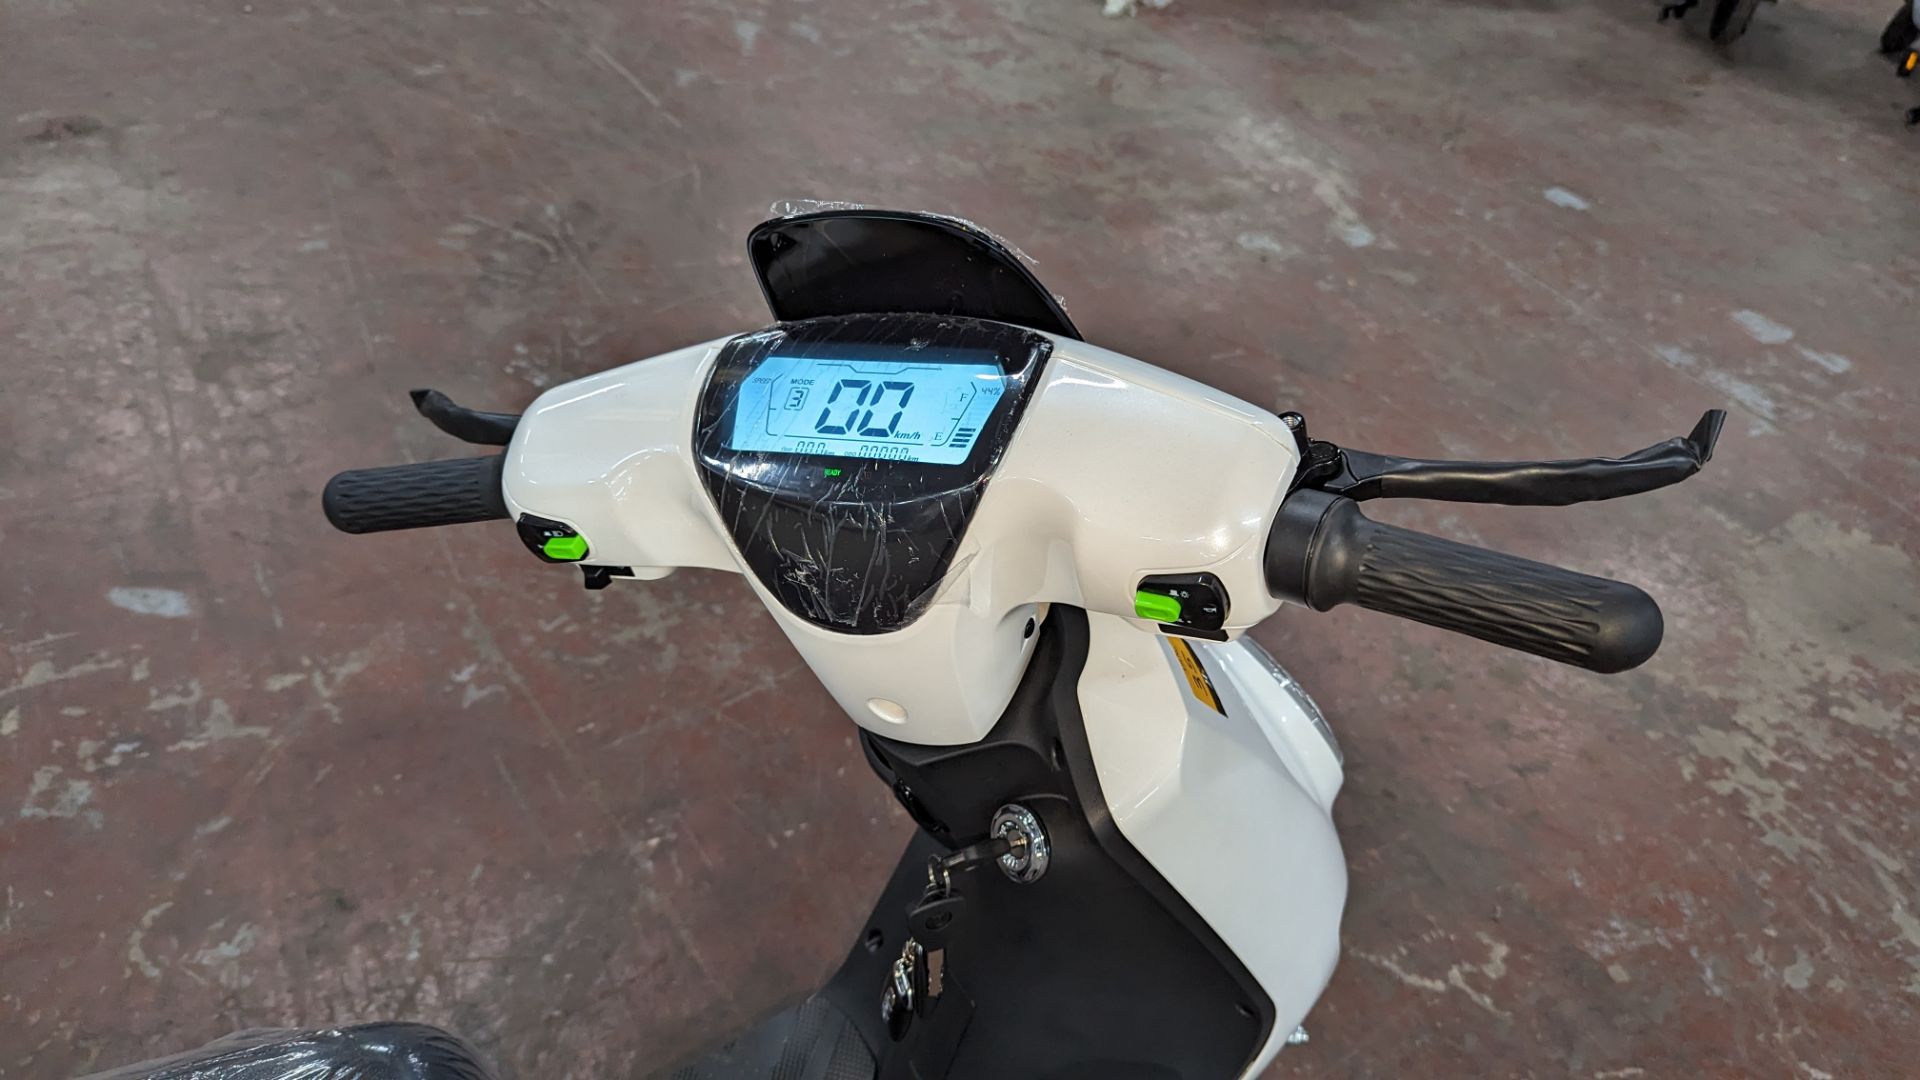 Model 18 Electric Bike: Zero (0) recorded miles, white body with black detailing, insulated box moun - Image 10 of 13